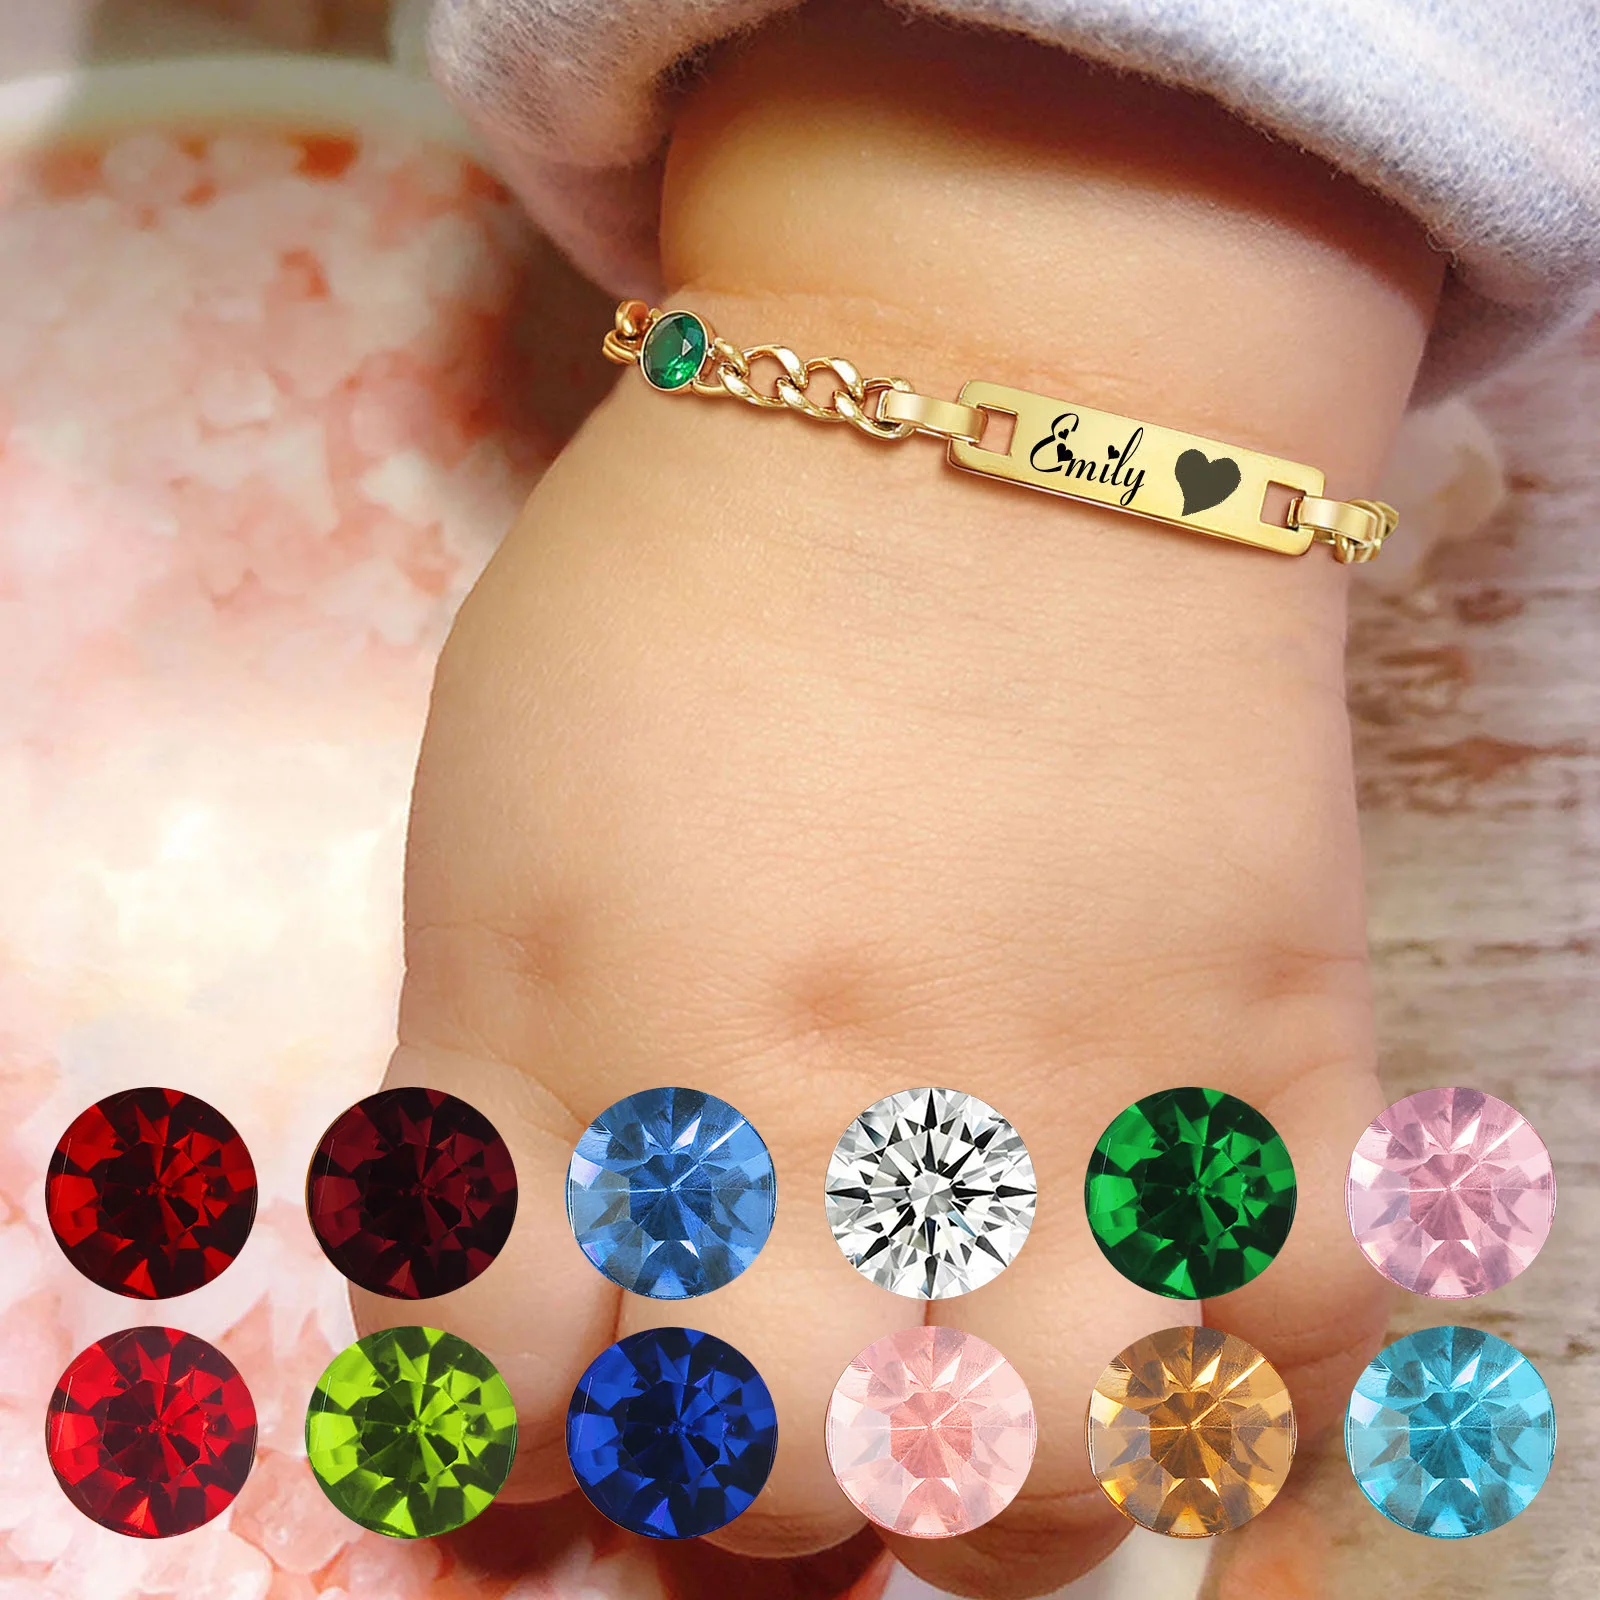 aliexpress.com - Engrave Personalized ID Baby Bracelet with Birthstone,Customzied Name Curb Chain Adjustable,Newborn Boy Girl Child Birthday Gift